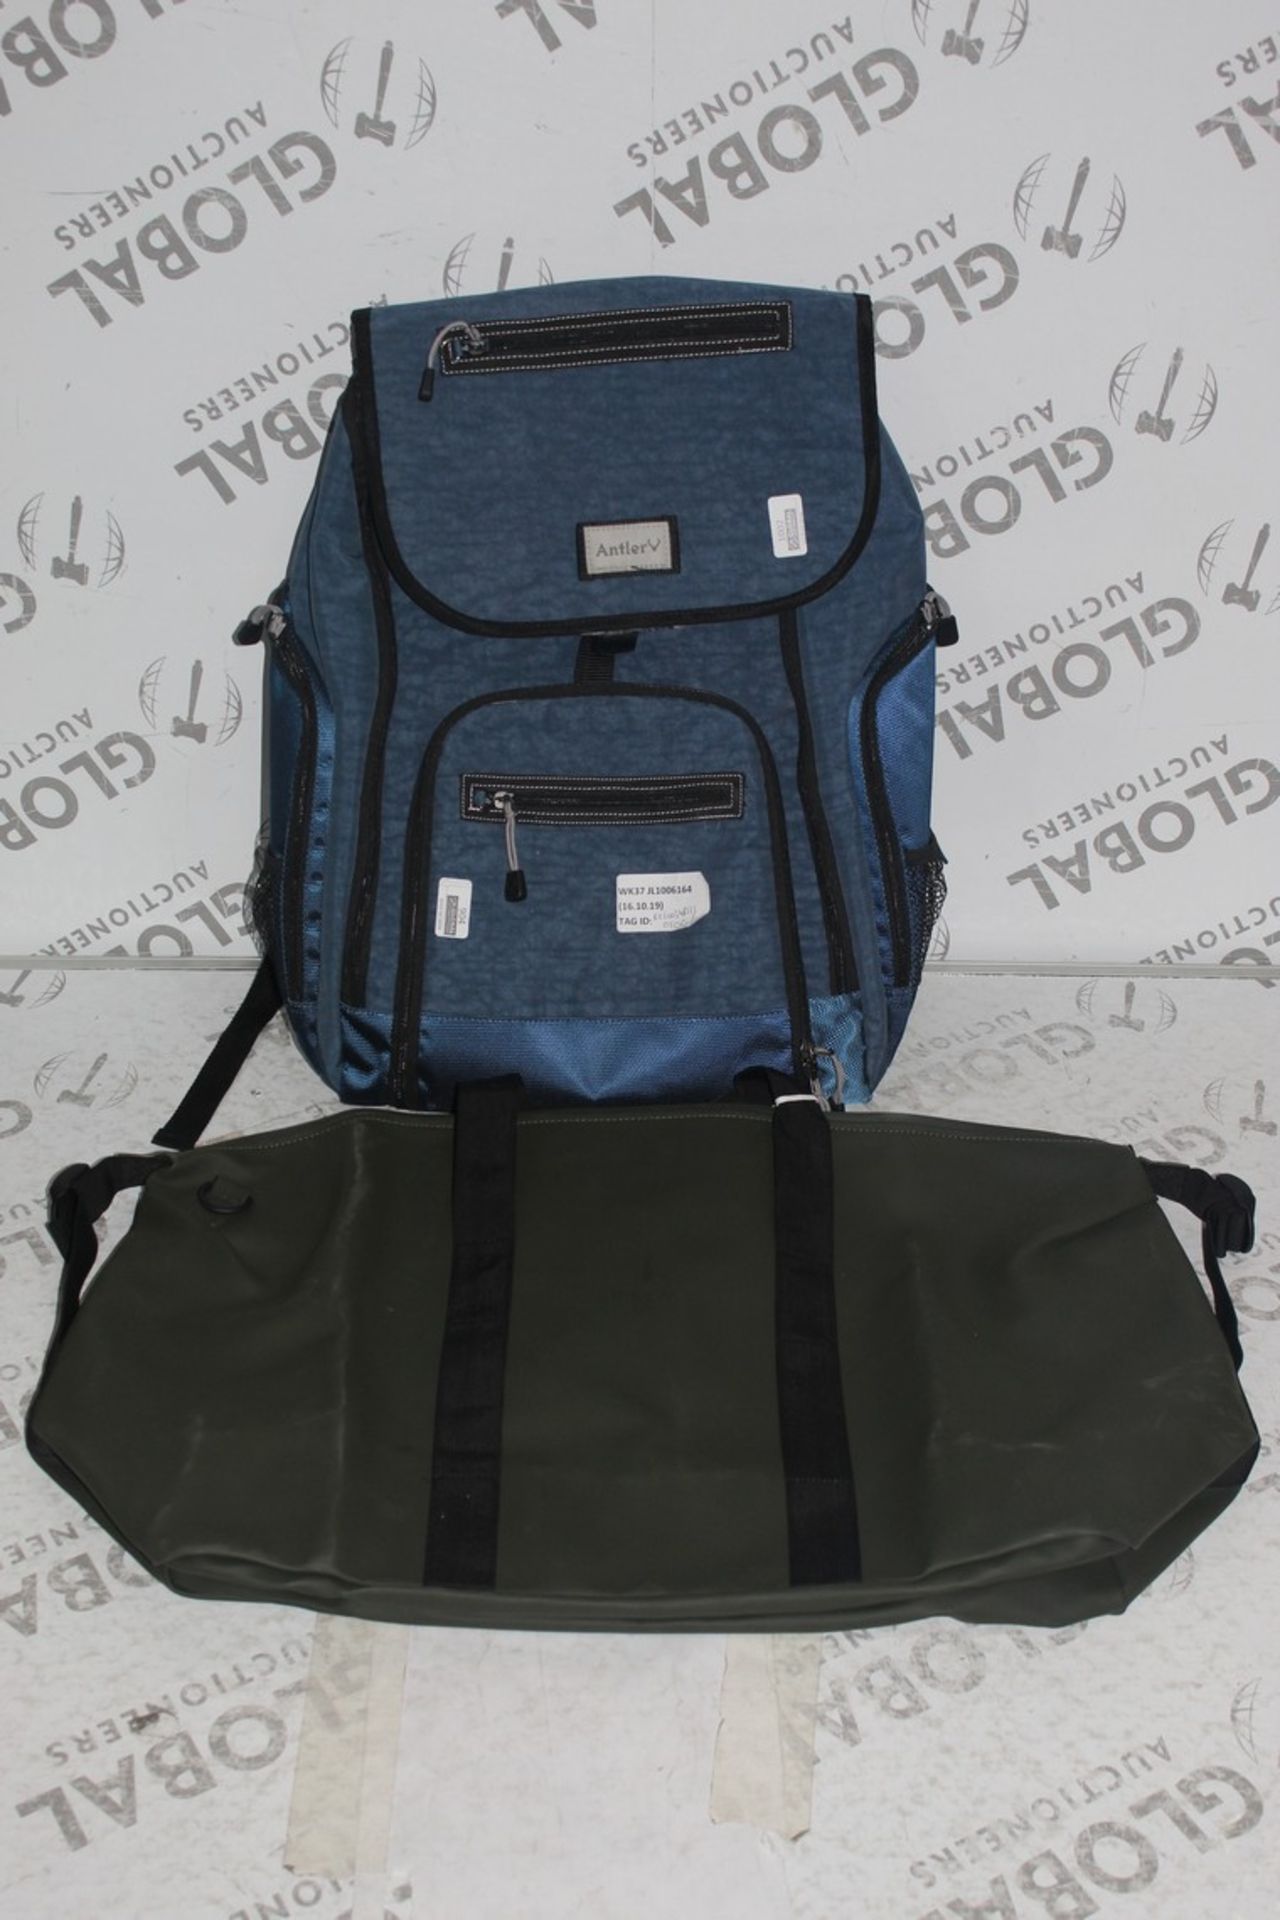 Assorted Antler Navy Blue Rucksacks and Holdalls RRP £50 Each (RET00248511) (Public Viewing and